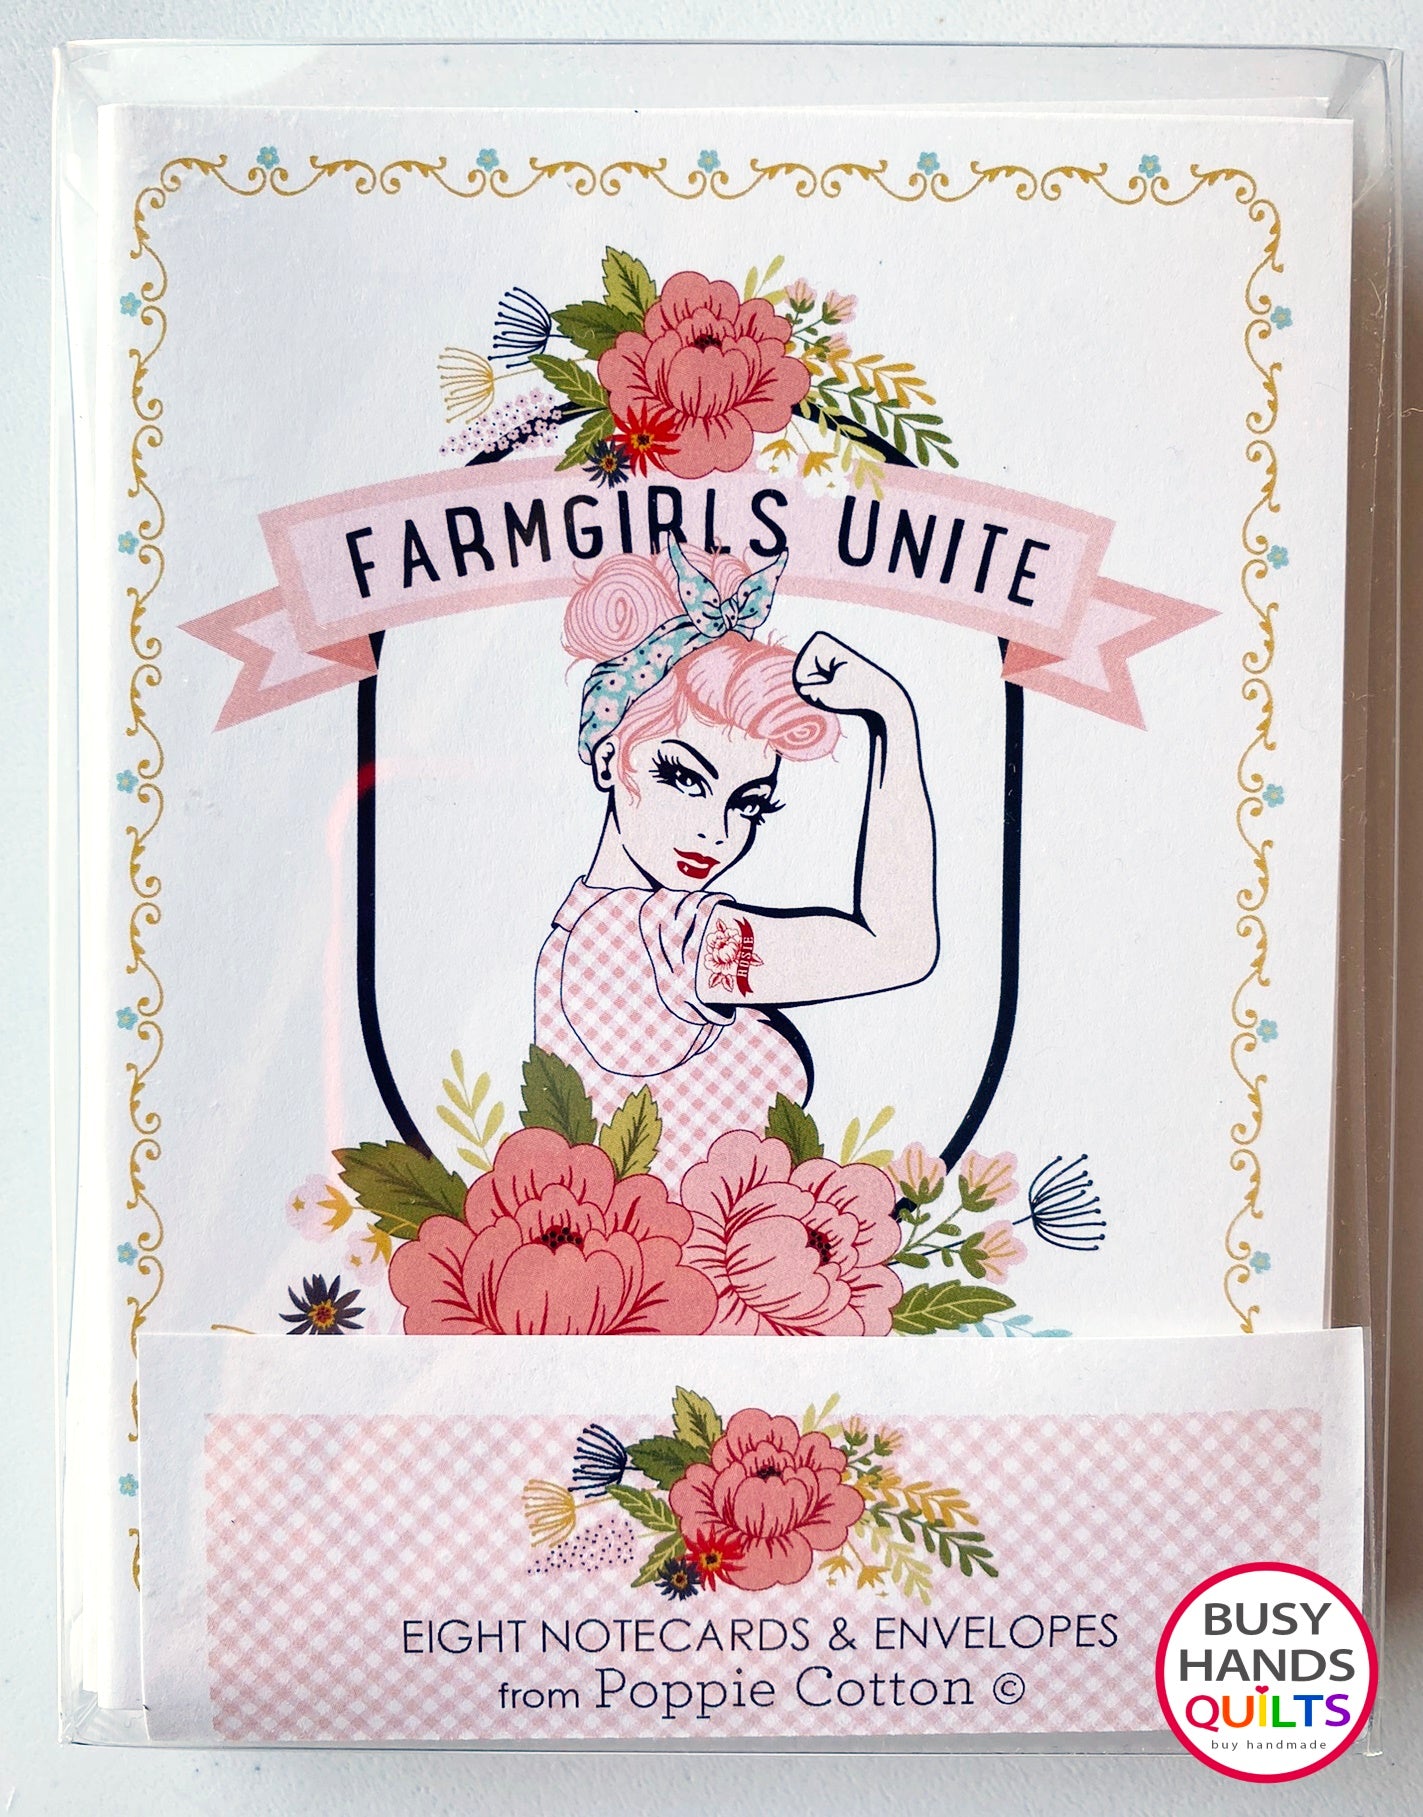 Farmgirls Unite 8 Notecards and Envelopes by Poppie Cotton